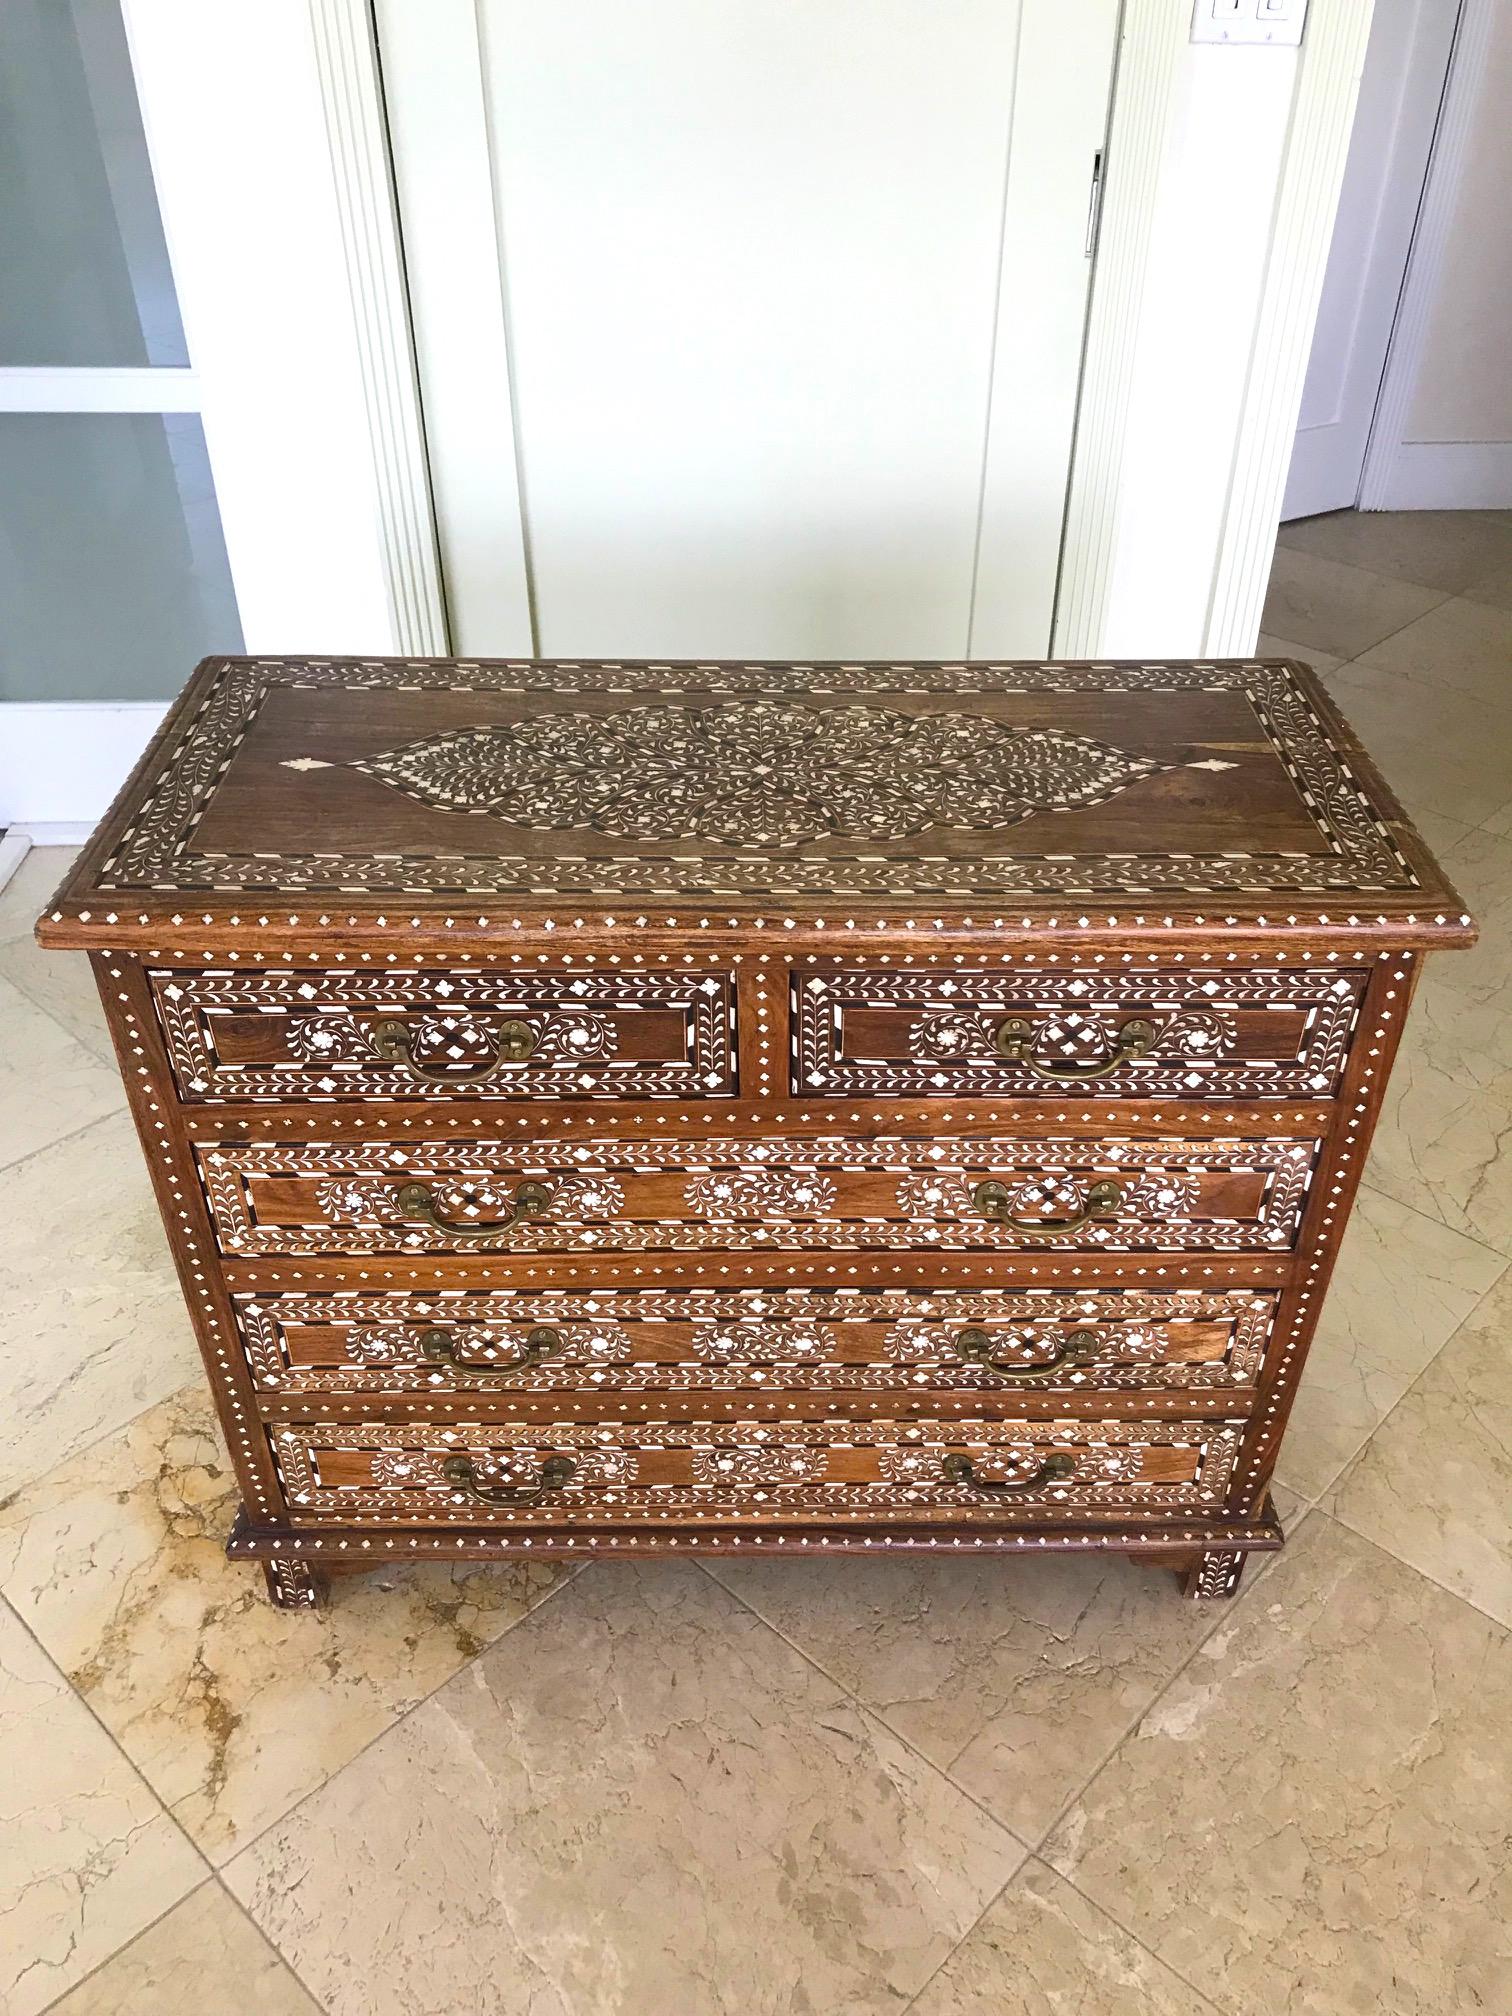 Midcentury Syrian chest of drawers with outstanding series of Moorish designs. All handcrafted by artisans comprised of reclaimed teak wood with bone, mother of pearl, and rosewood inlays throughout. The inlays create intricate geometric and floral